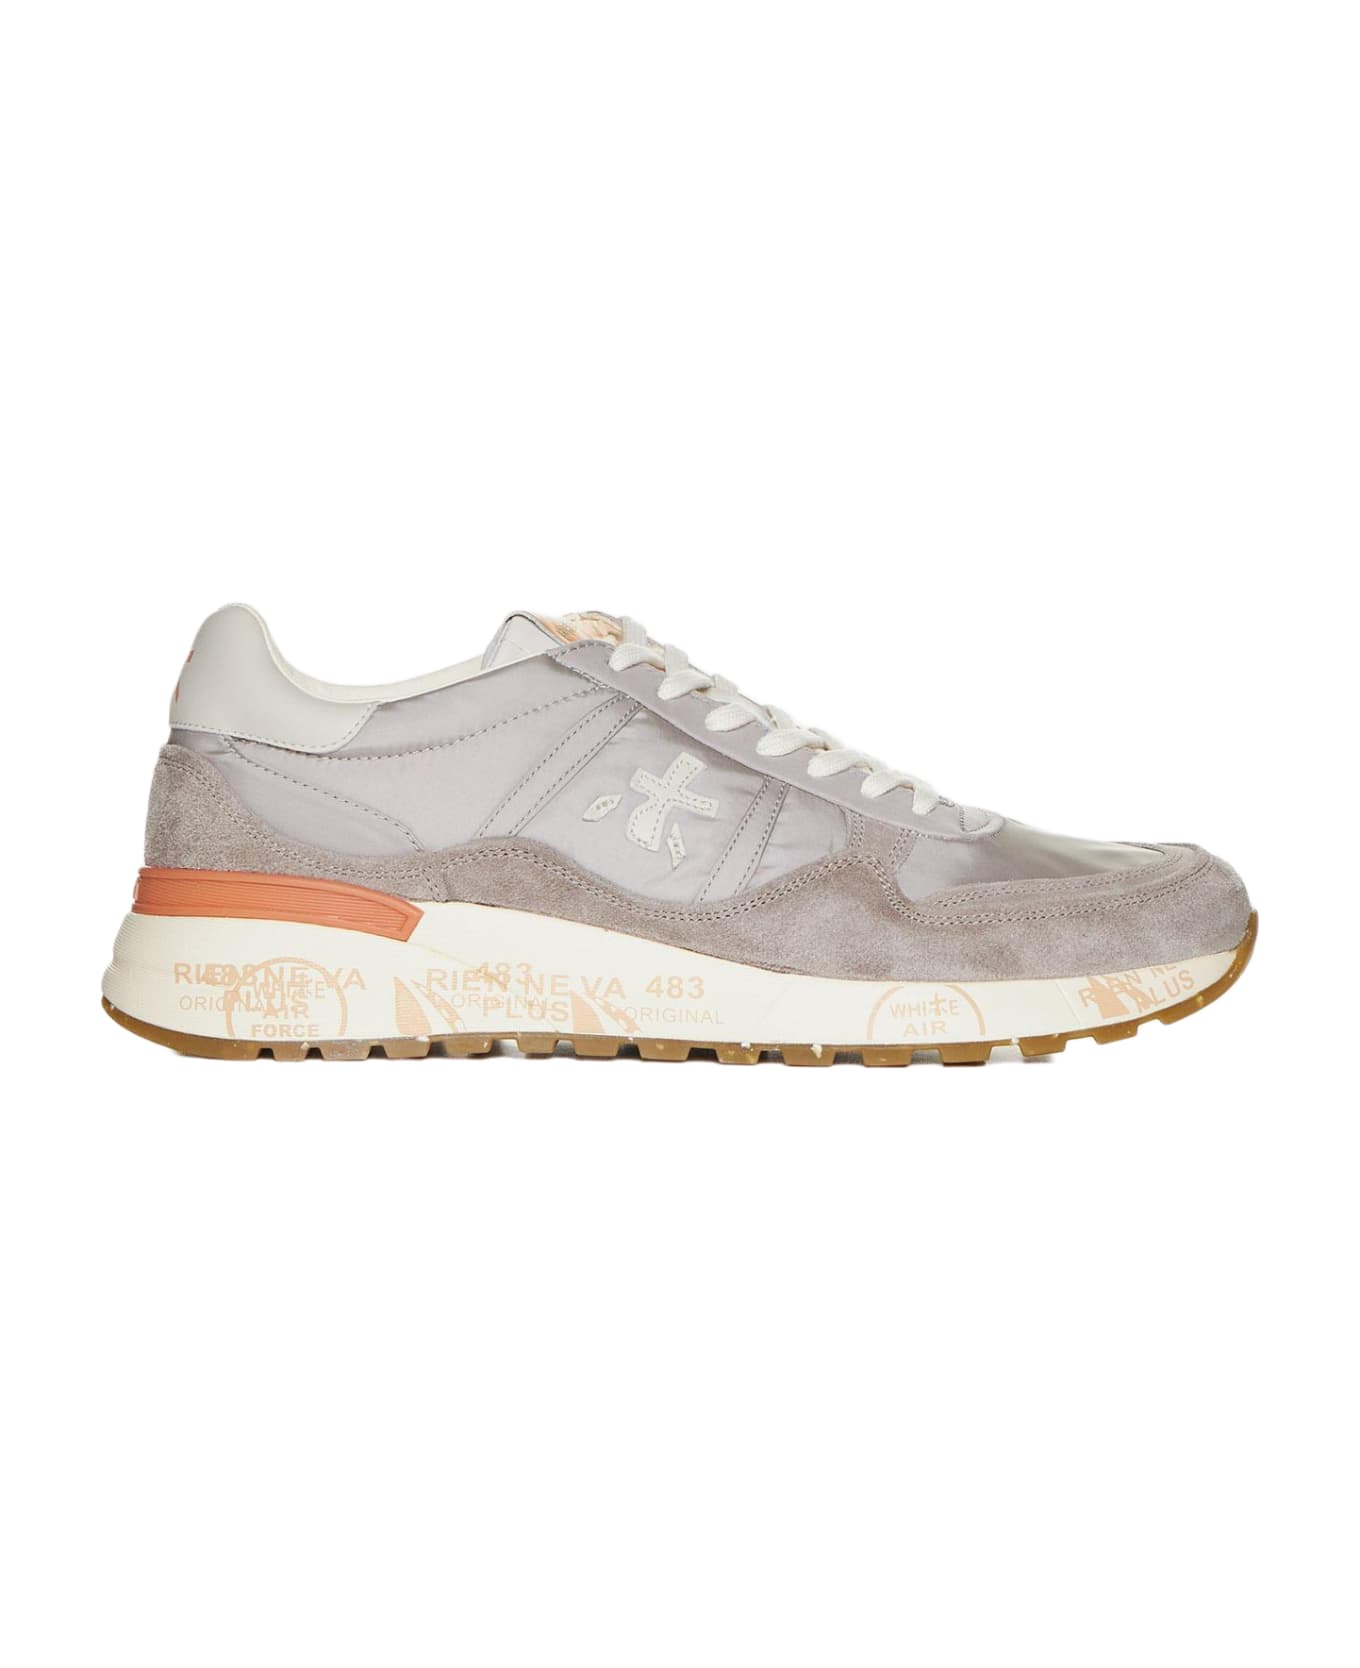 Premiata Landeck Leather, Nylon And Suede Sneakers - Grey